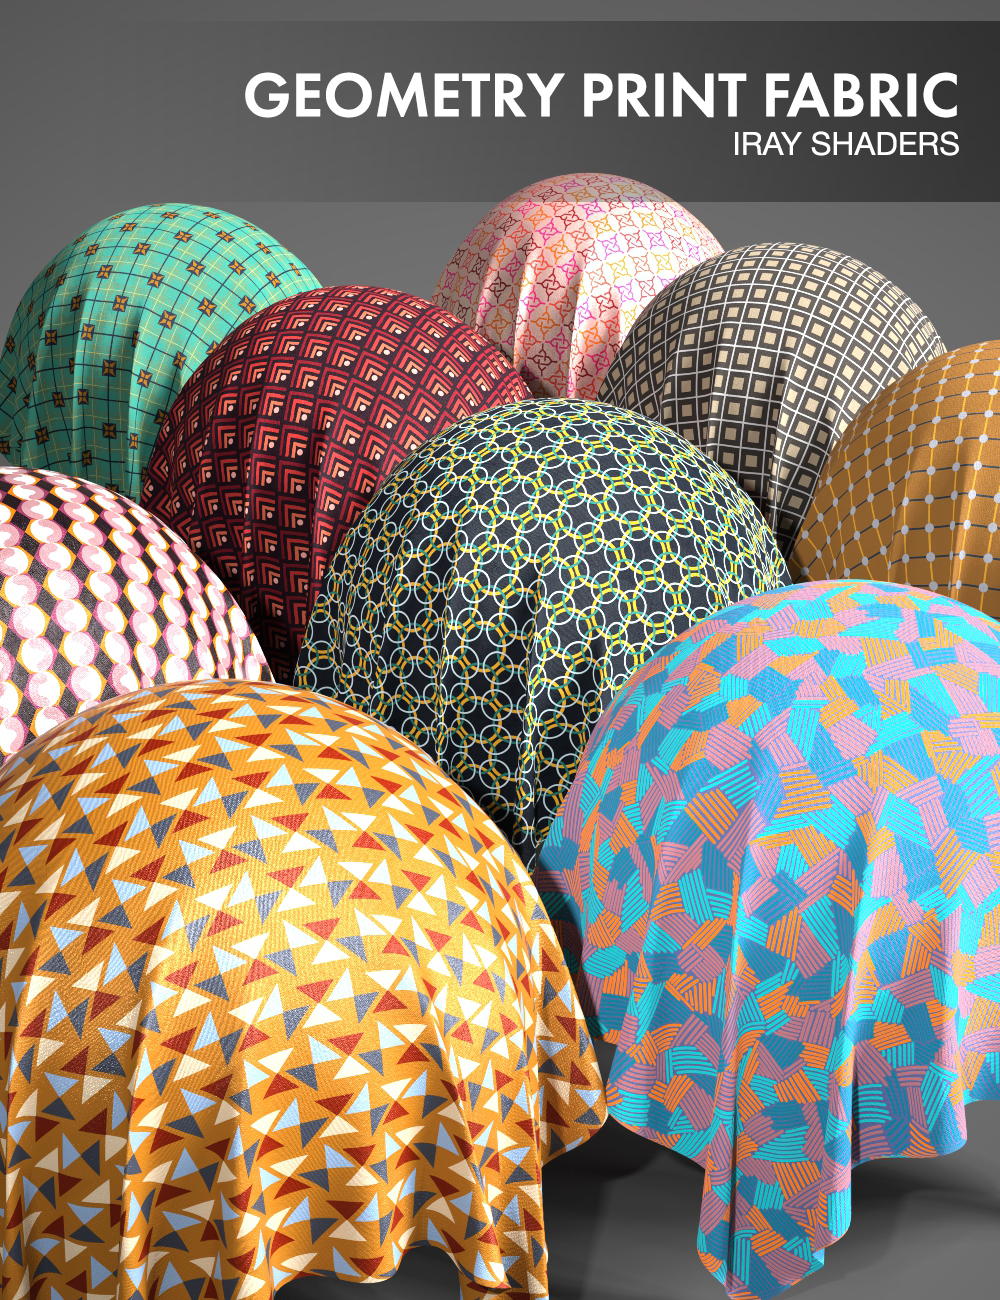 Geometry Print Fabric - Iray Shaders by: Dimidrol, 3D Models by Daz 3D